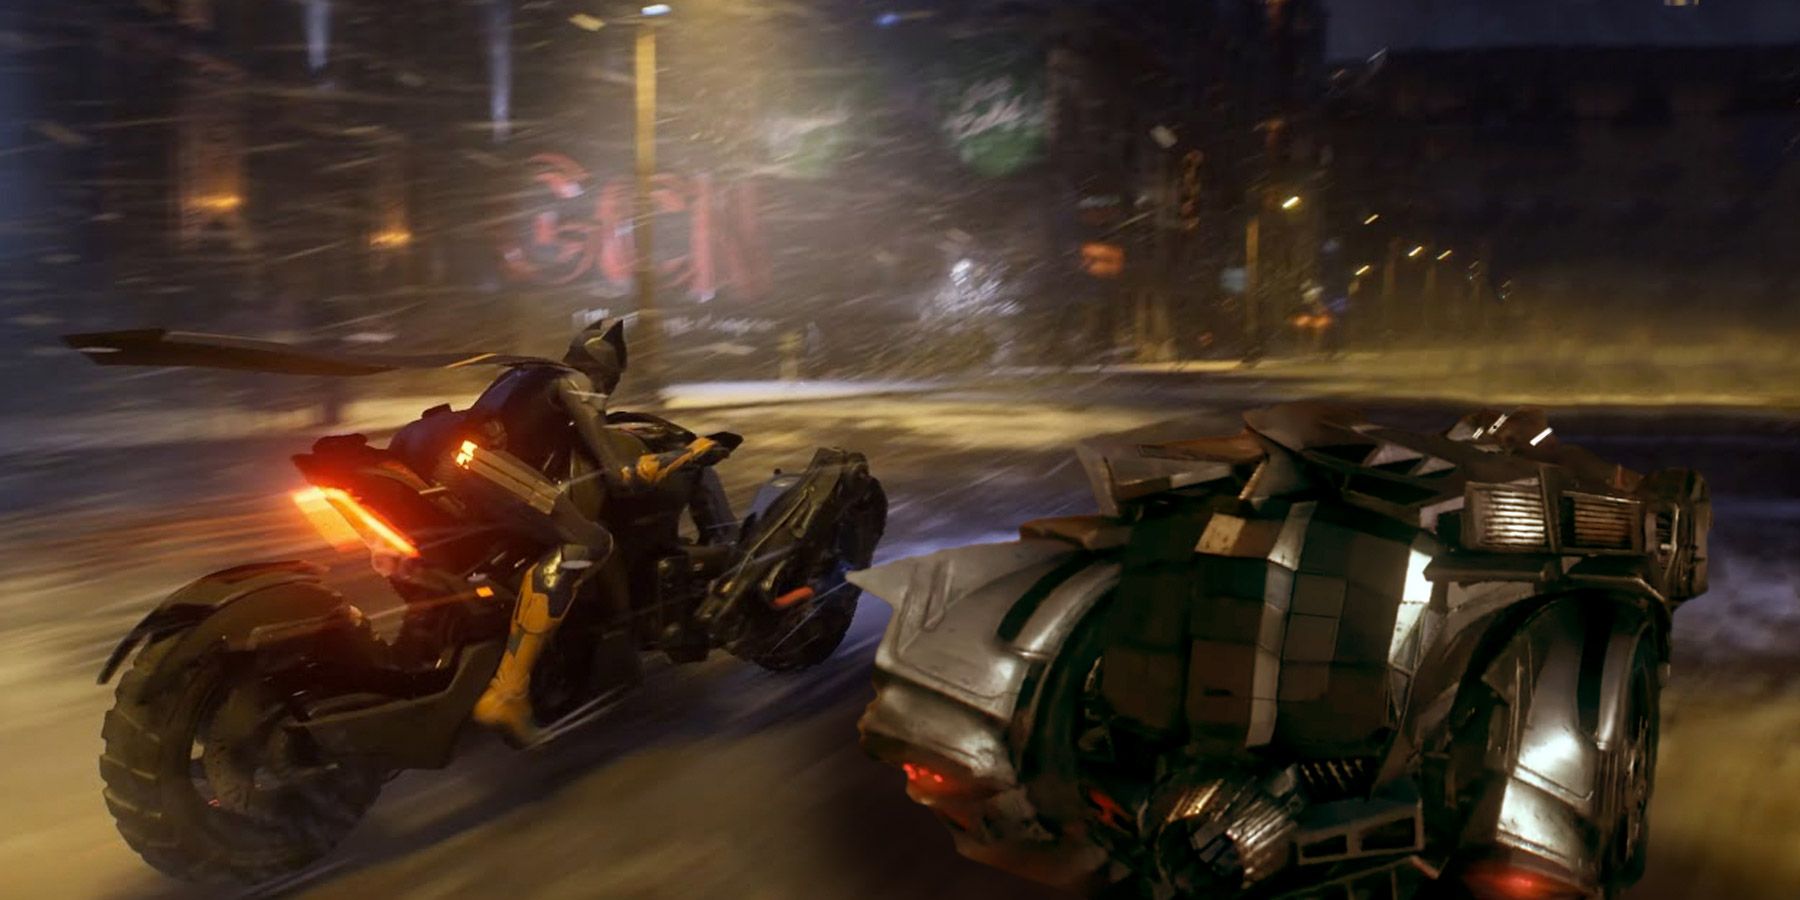 Gothamn Knights Batcycle Compete With Arkham Batmobile